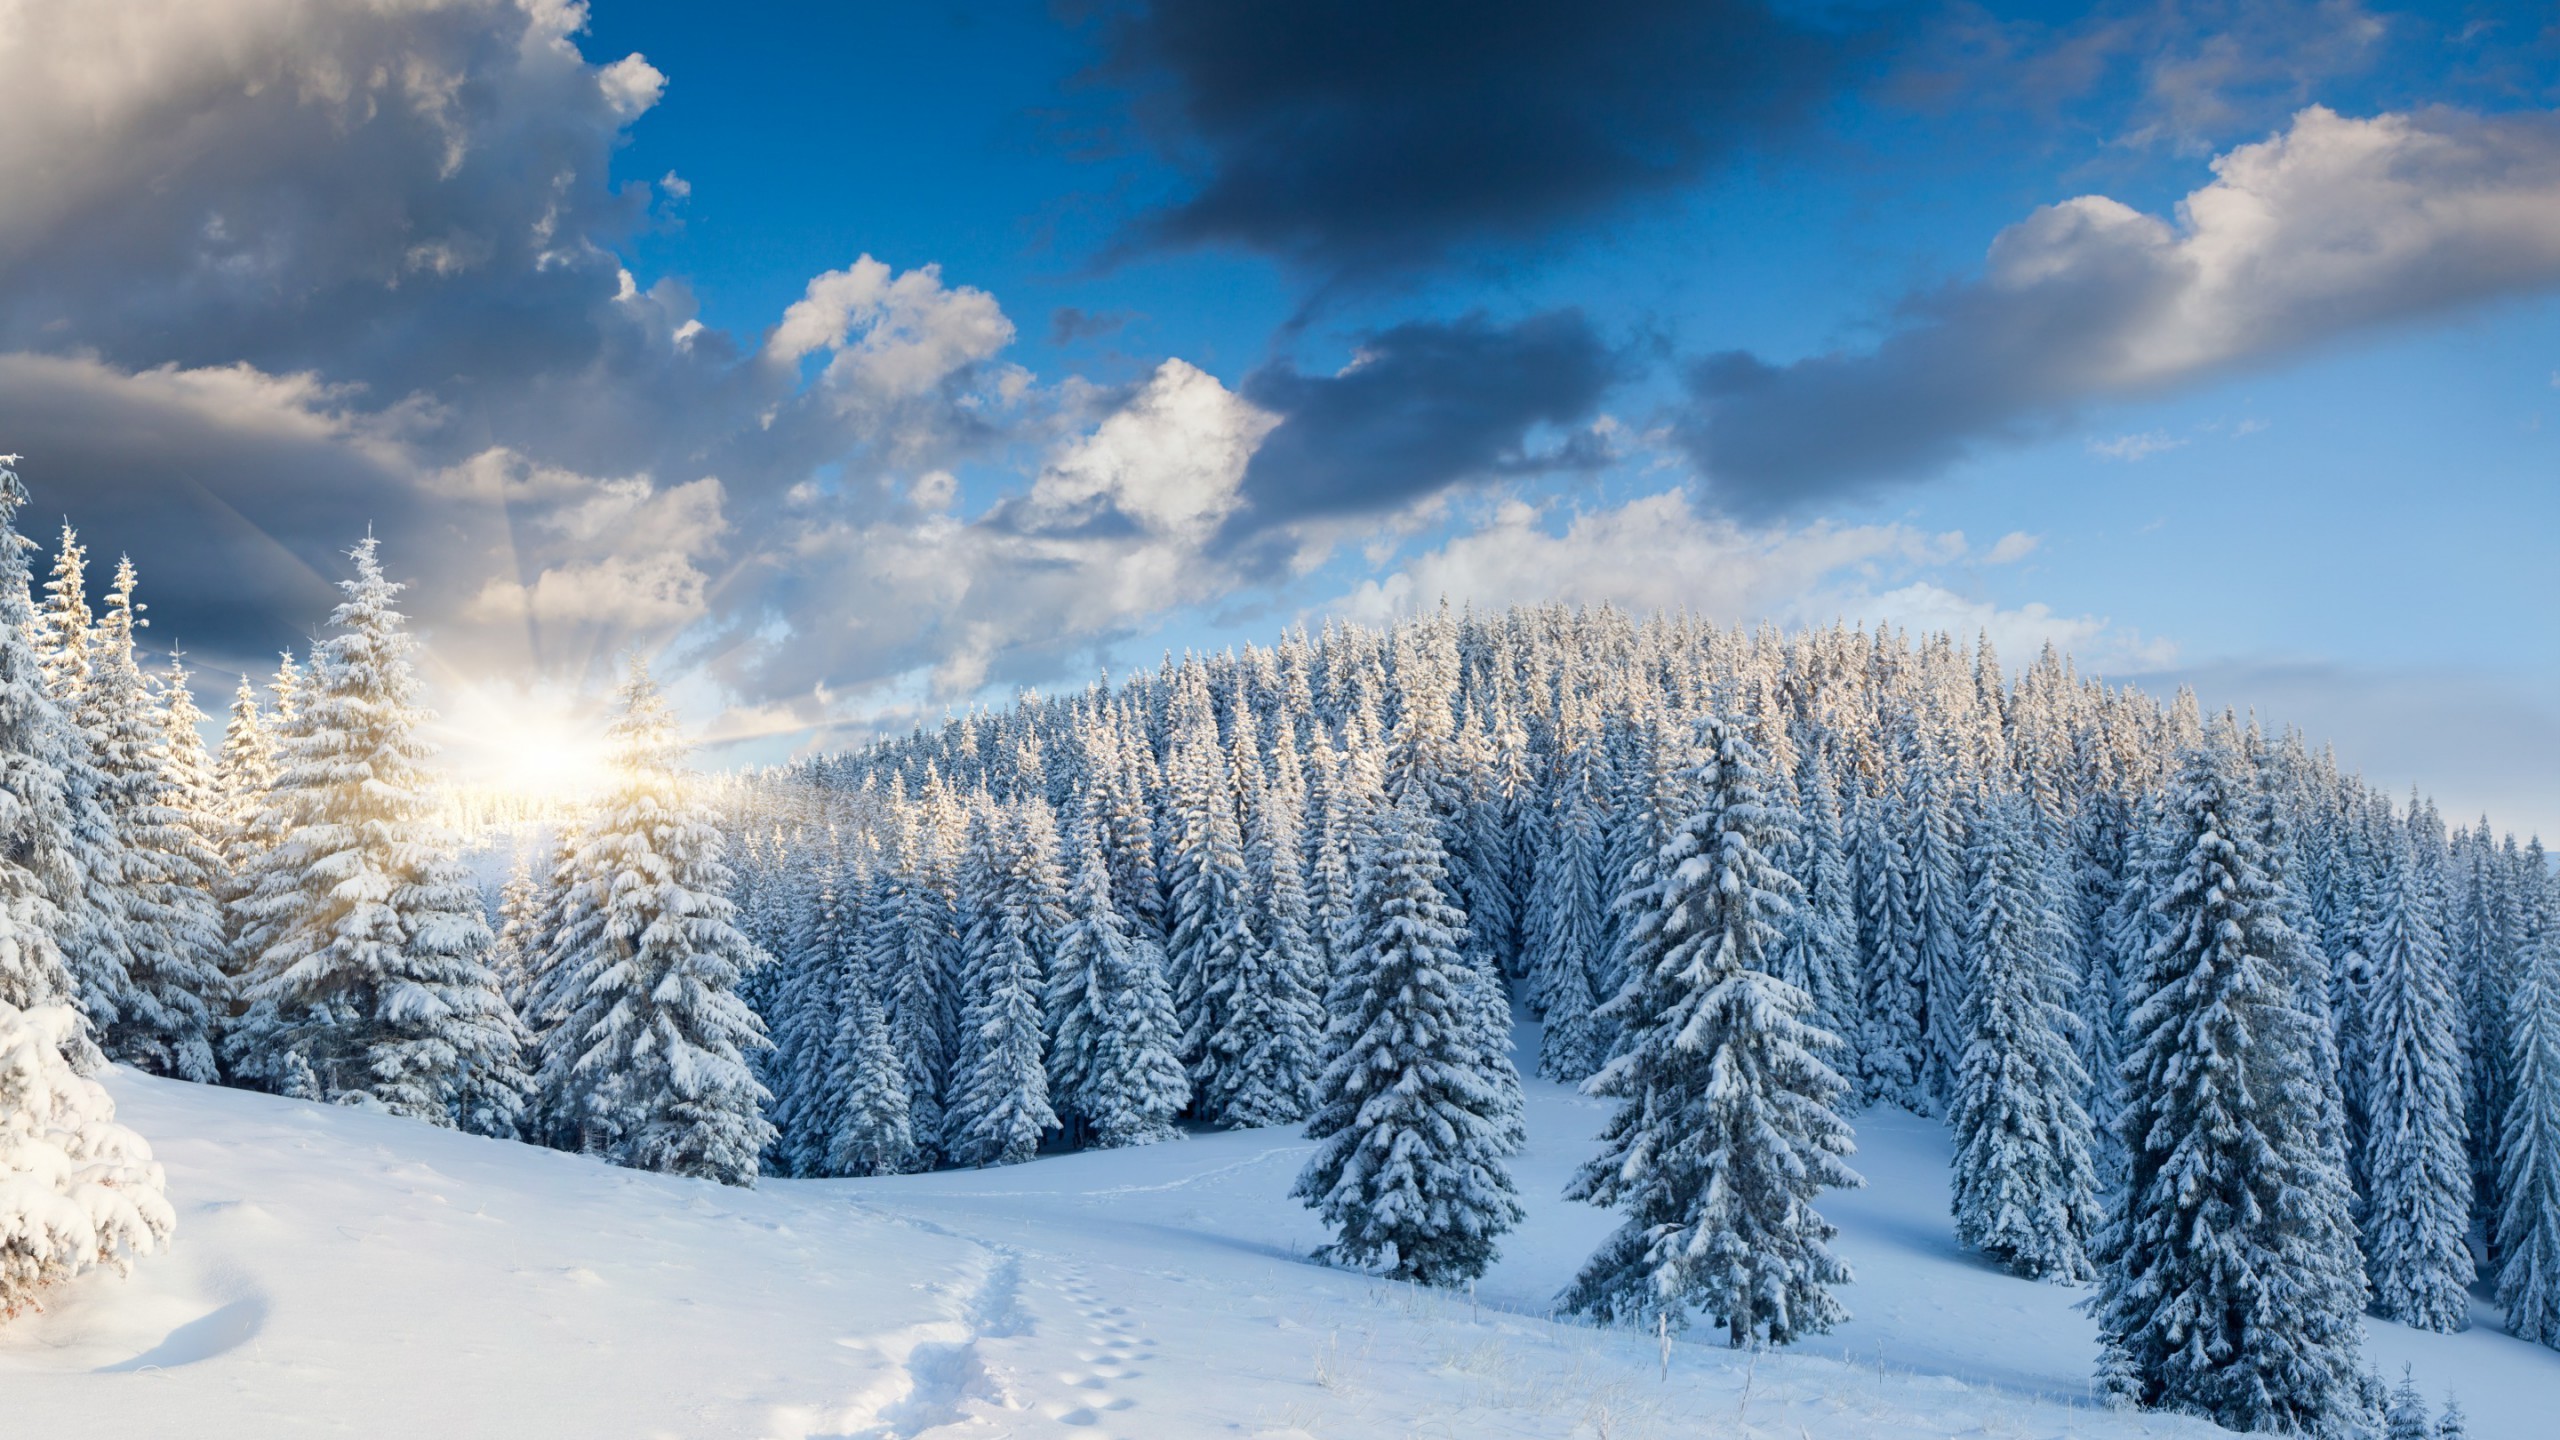 Snow forest wallpapers â wallpaper cave